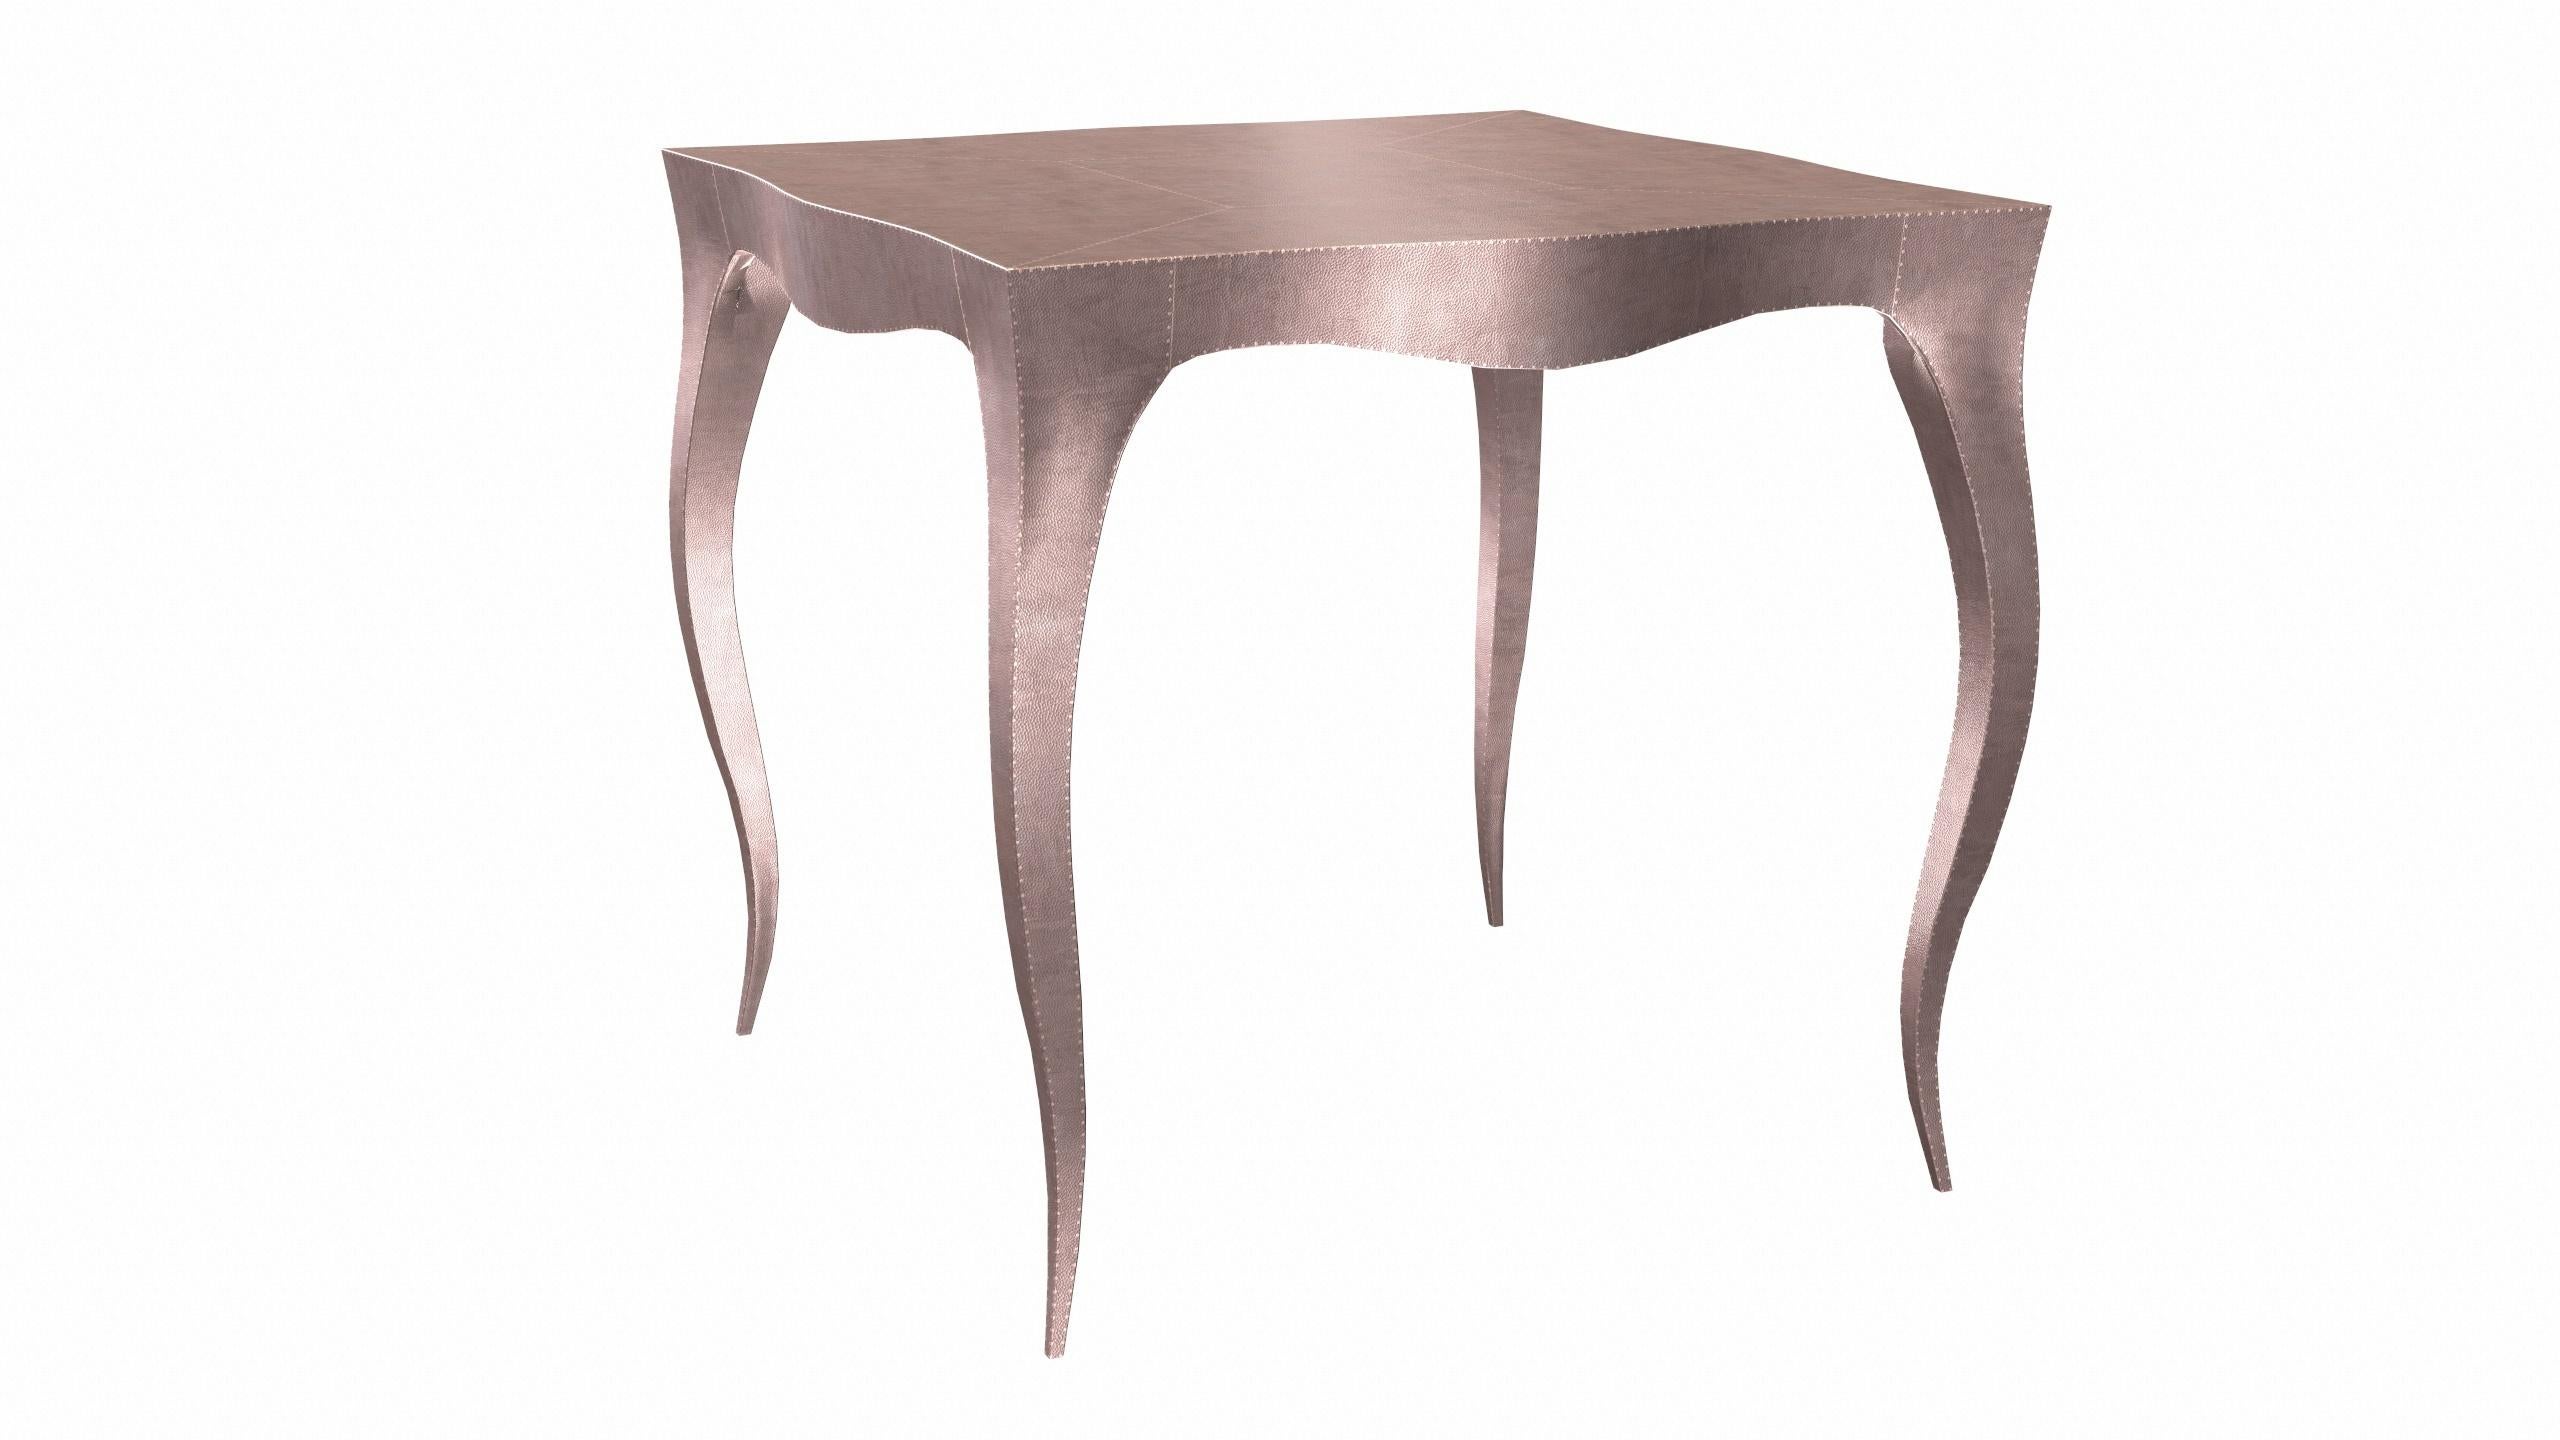 Hand-Carved Louise Art Deco Coffee and Cocktail Tables Mid. Hammered Copper by Paul Mathieu For Sale